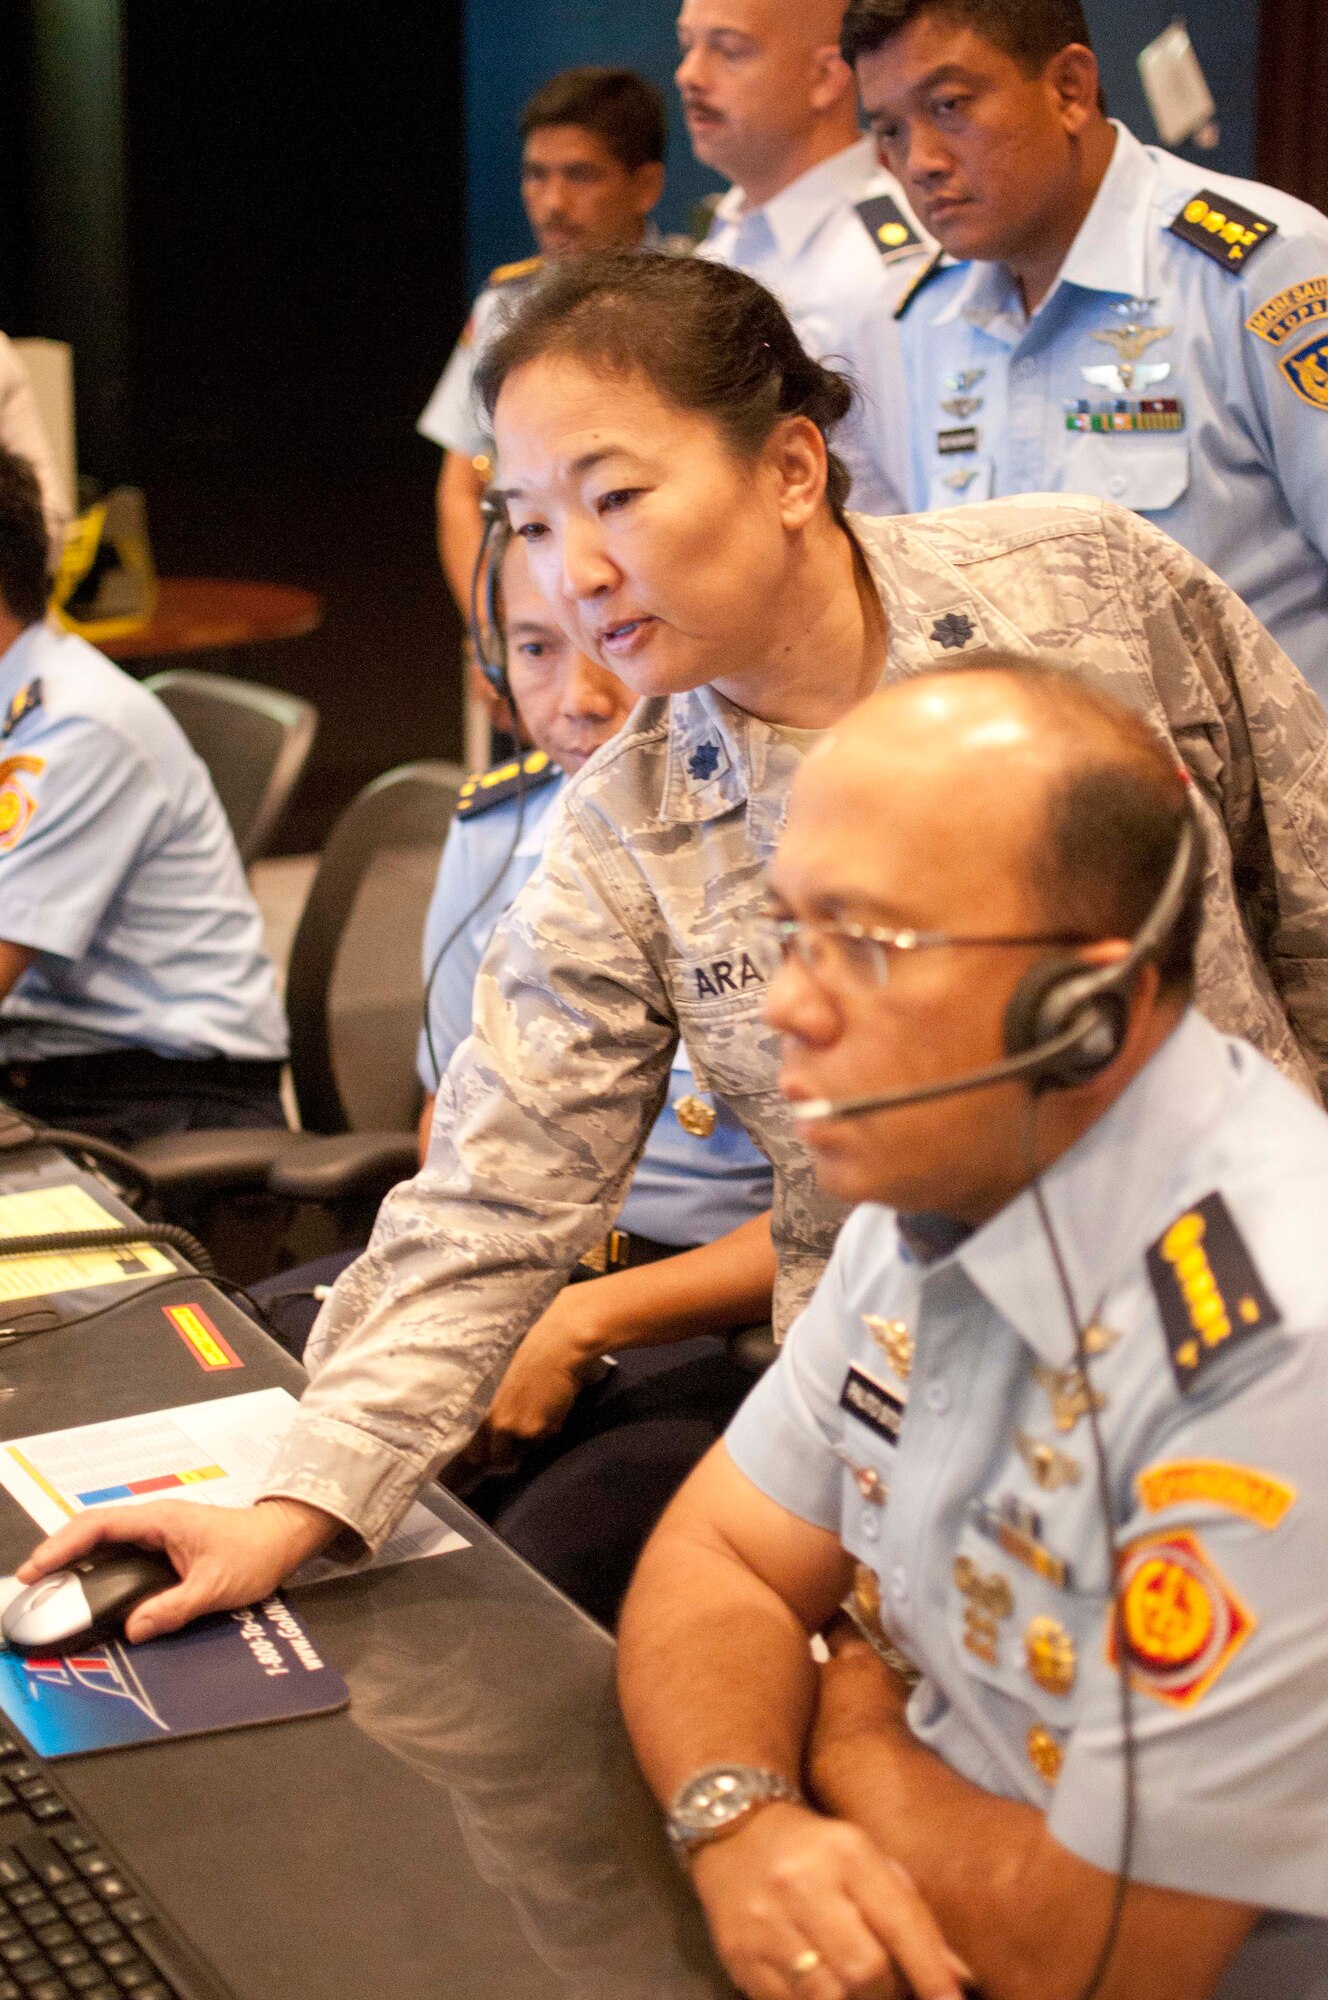 U.S. Air Force Lt. Col. Gaye Araki from the Hawaii Air National Guard's 169th Air Defense Squadron assists in showing the Indonesian air defense delegation an exercise involving the scrambling of fighter jets responding to a potential threat in the Hawaii air space, Aug. 30 2016, Wheeler Army Airfield, Hawaii. This is the second time a Subject Matter Expert Exchange between the Indonesian air defense and the 169th Air Defense Squadron has been conducted and the first time the Indonesians have come to Hawaii. (U.S. Air National Guard photo by Airman 1st Class Stan Pak/released)